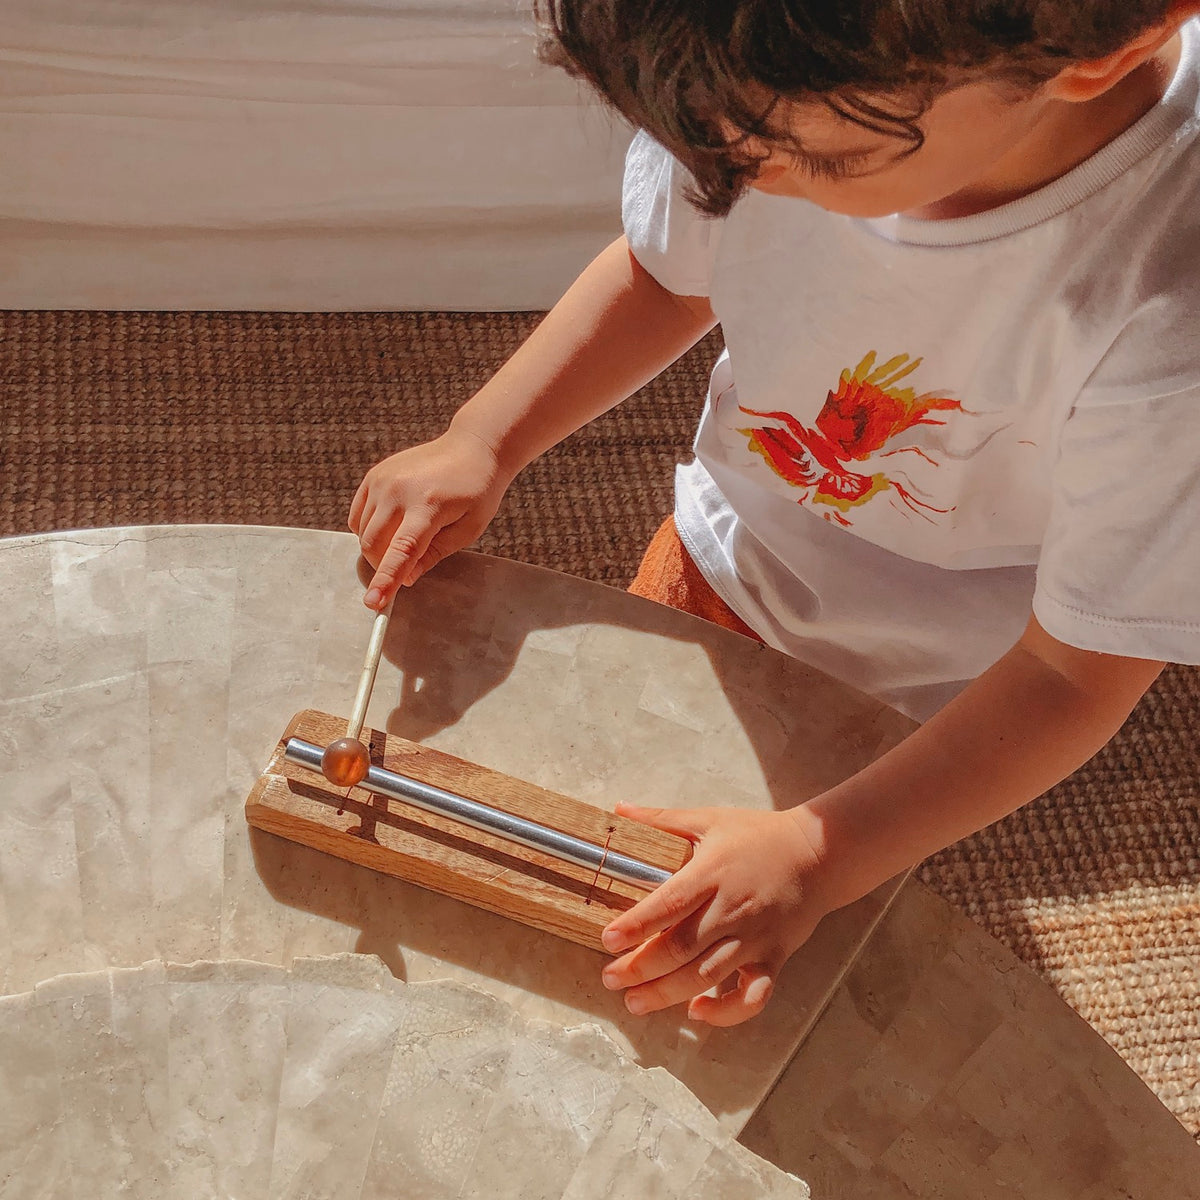 an image of a child wearing a white printed shirt sitting at a light coloured table playing a wooden chime bar instrument and there is a jute rug on the floor in the background